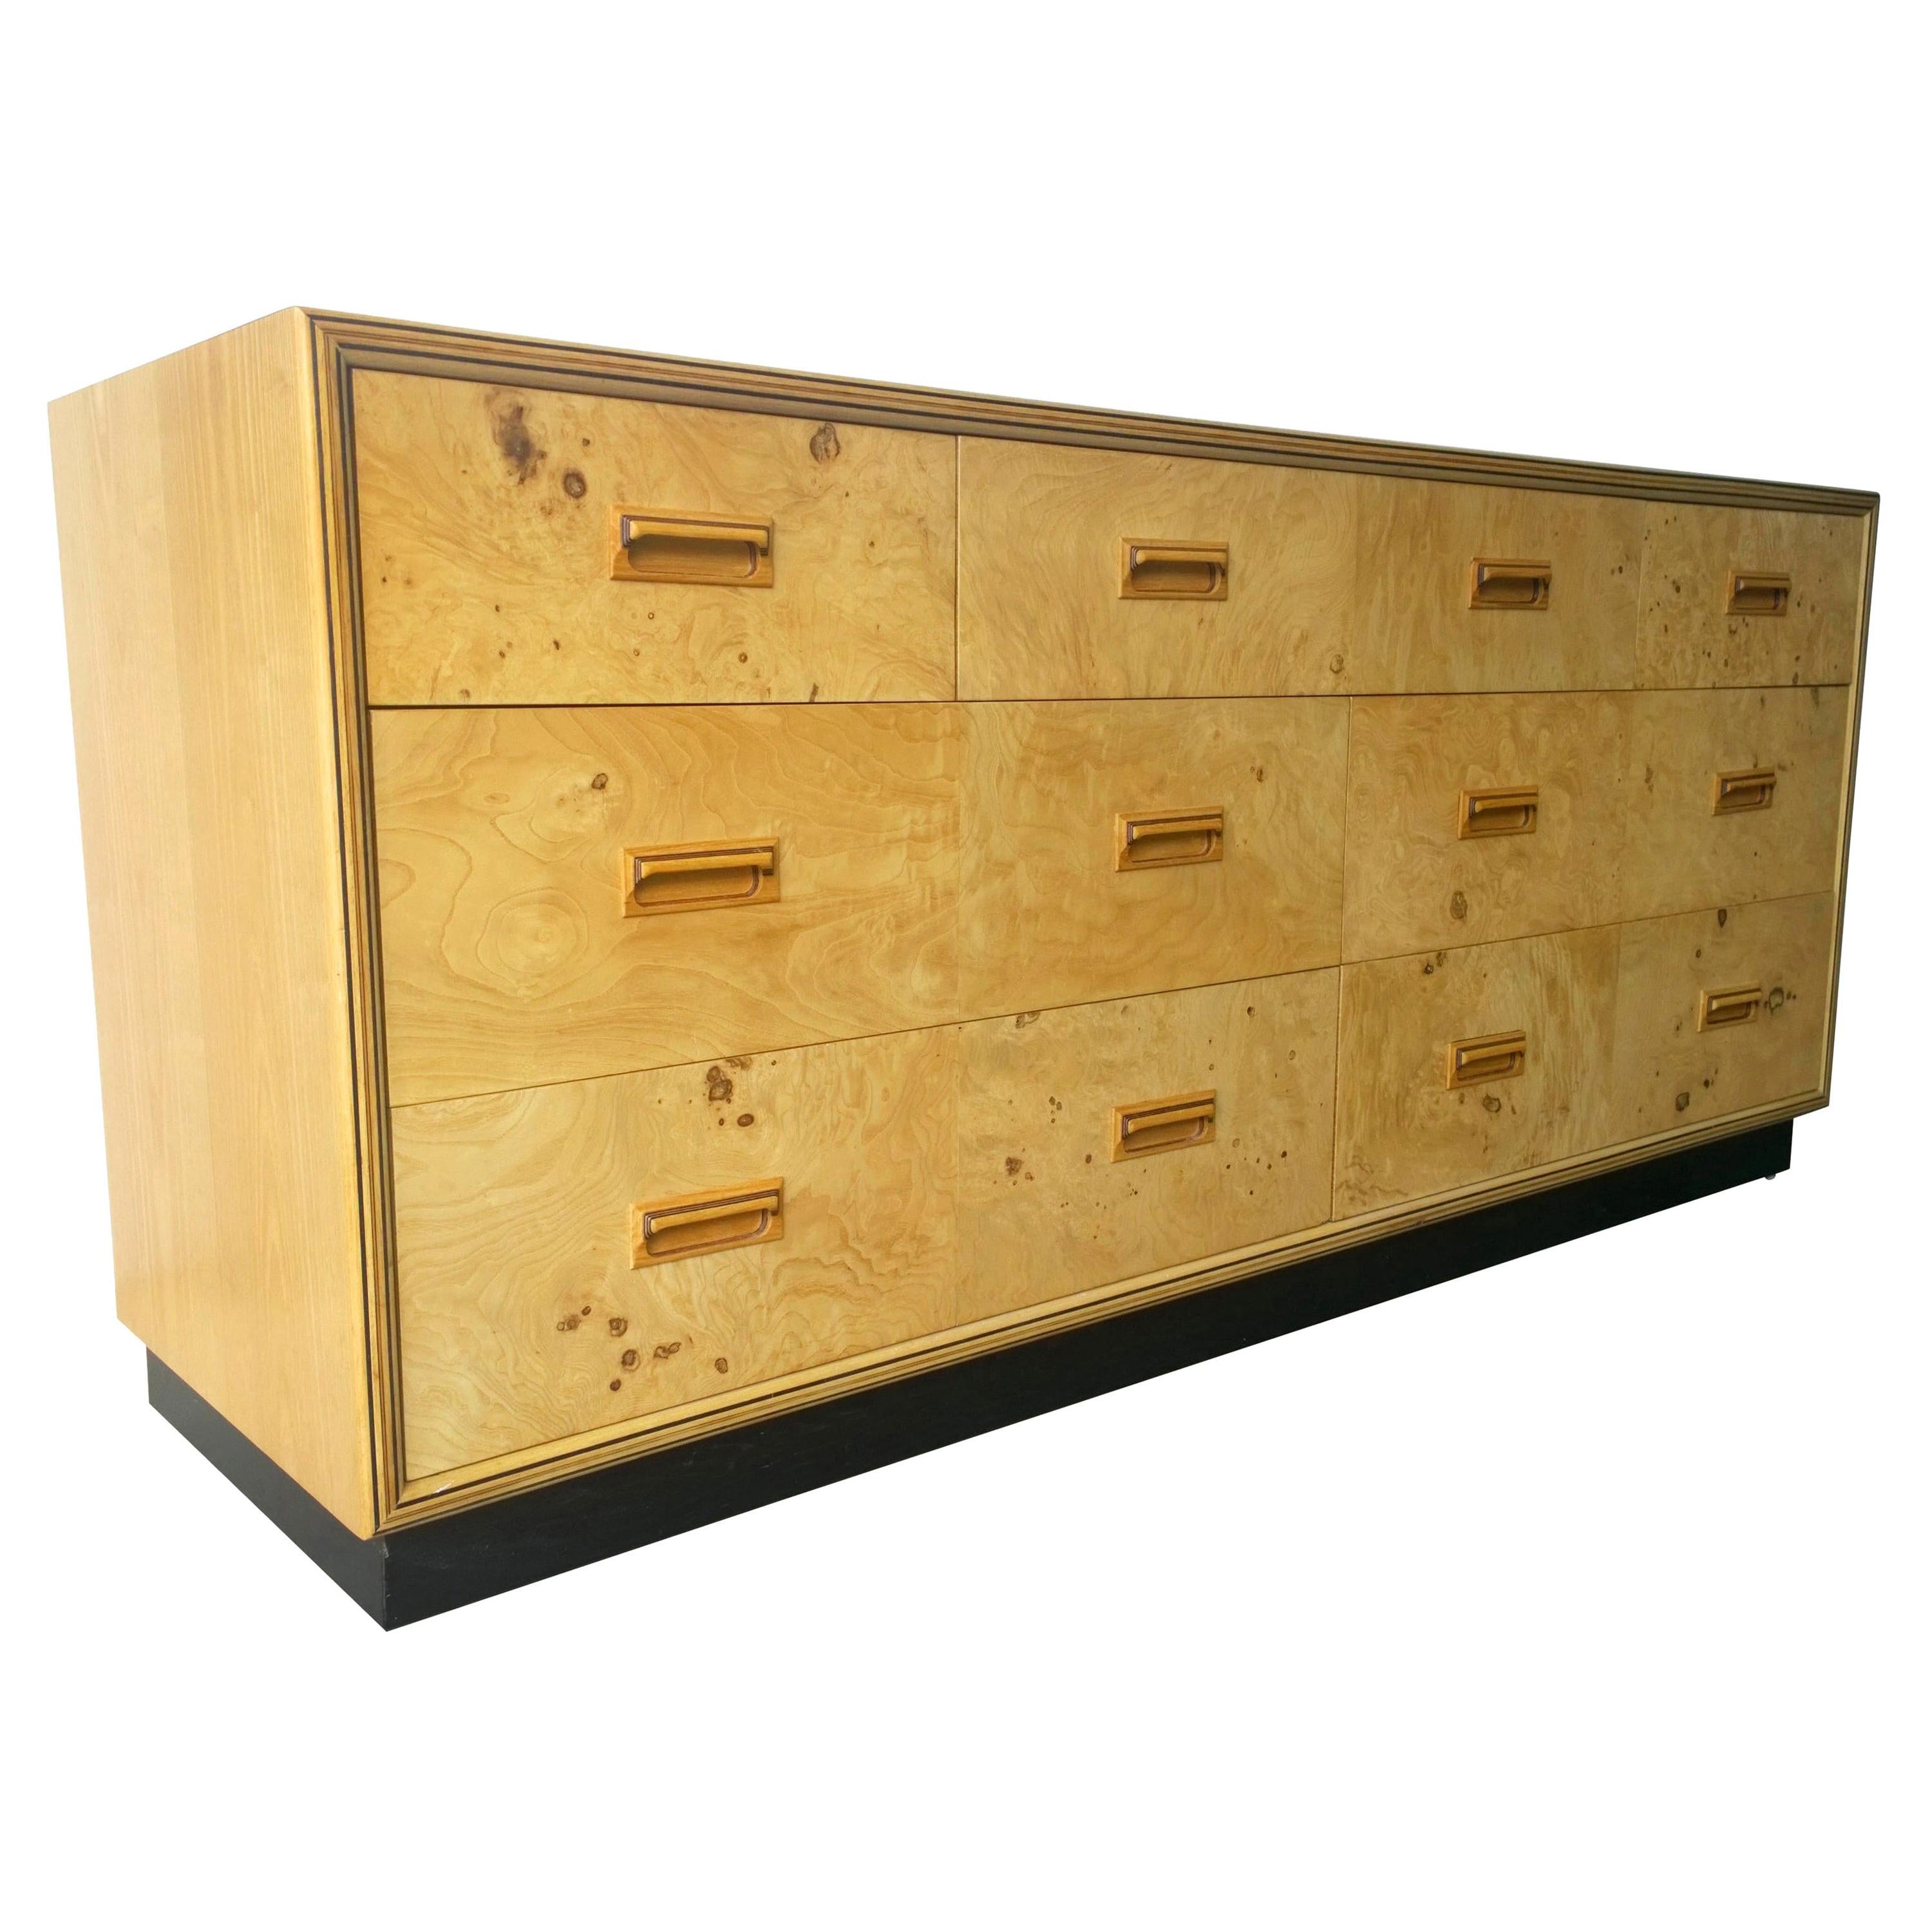 Henredon Dresser with an Oak Case, Burl Olive Drawers and Macassar Ebony Inlays For Sale